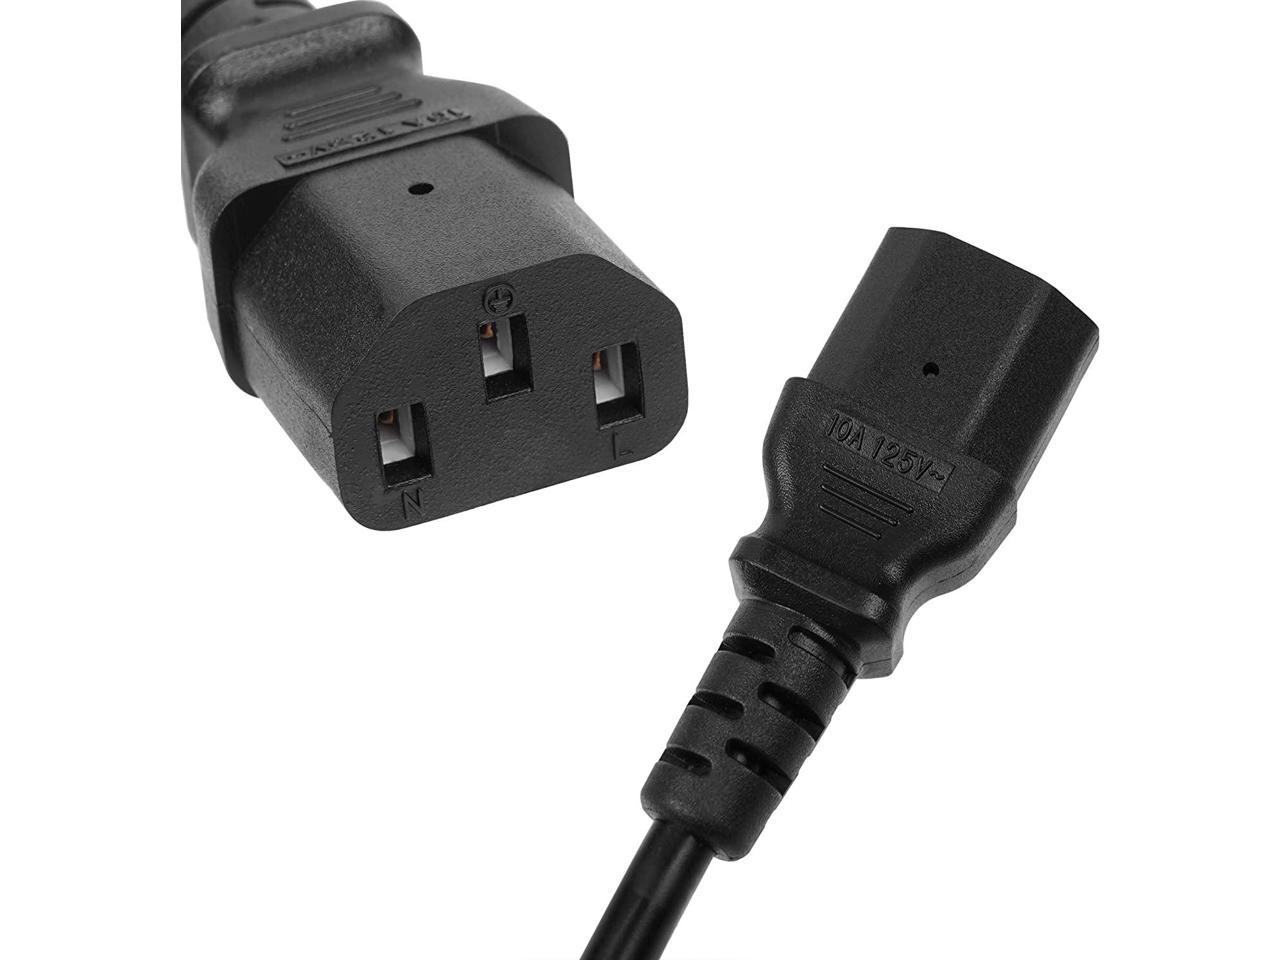 DUO60,Rice Cooker Duo Mini Power Cord Replacement for Instant Pot Electric Pressure Cooker Duo Plus Mini Soy Milk Maker and More Kitchen Appliance UL Listed-OEM Fit DUO50